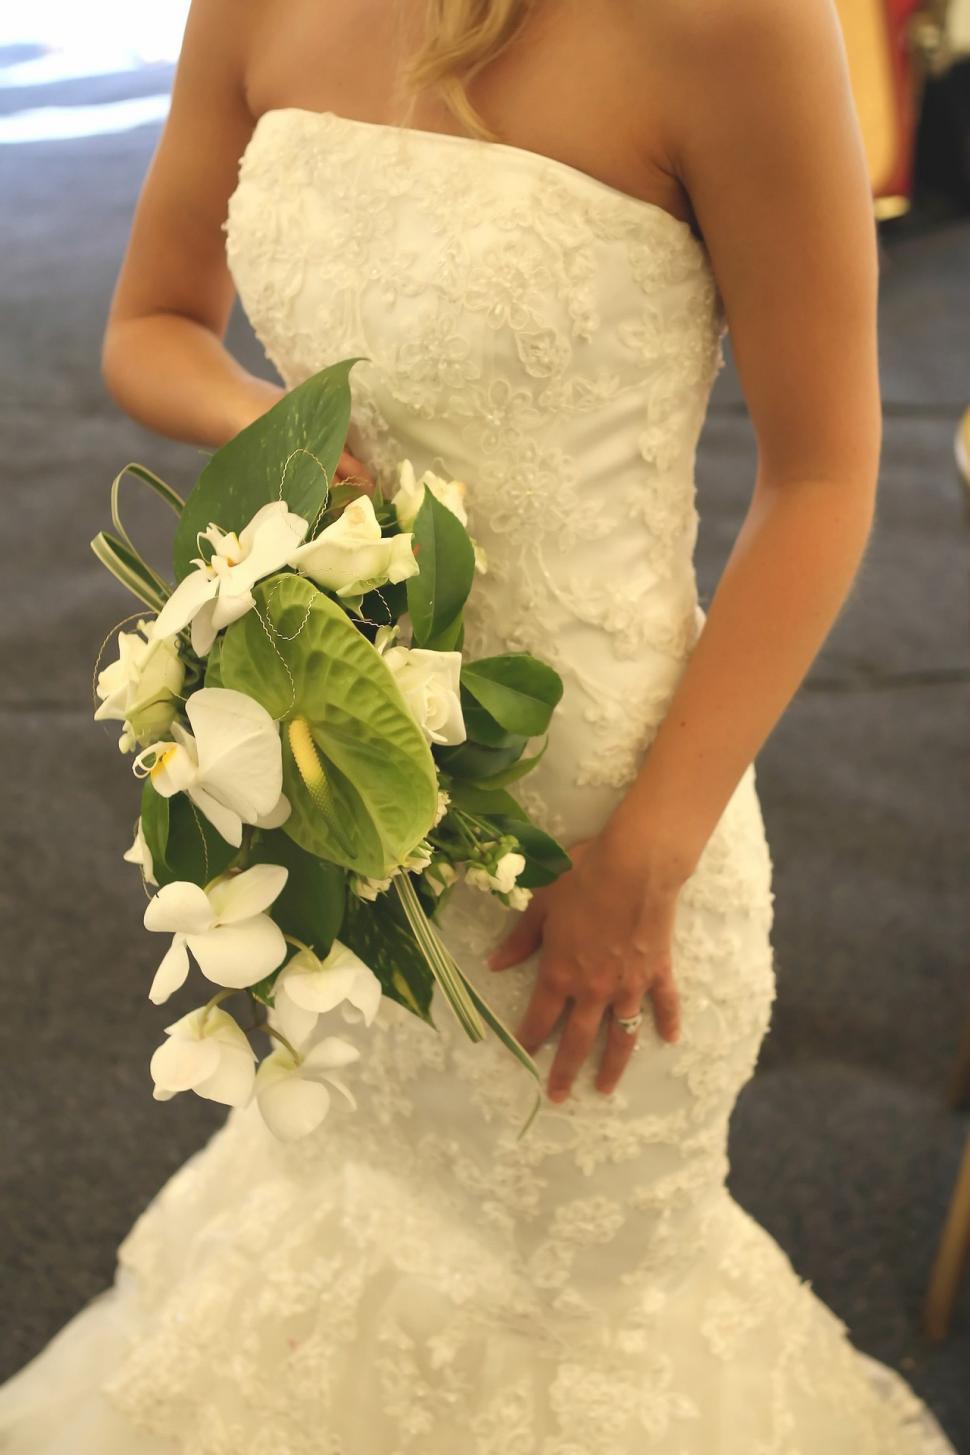 Free Image of Woman in Wedding Dress Holding Bouquet of Flowers 